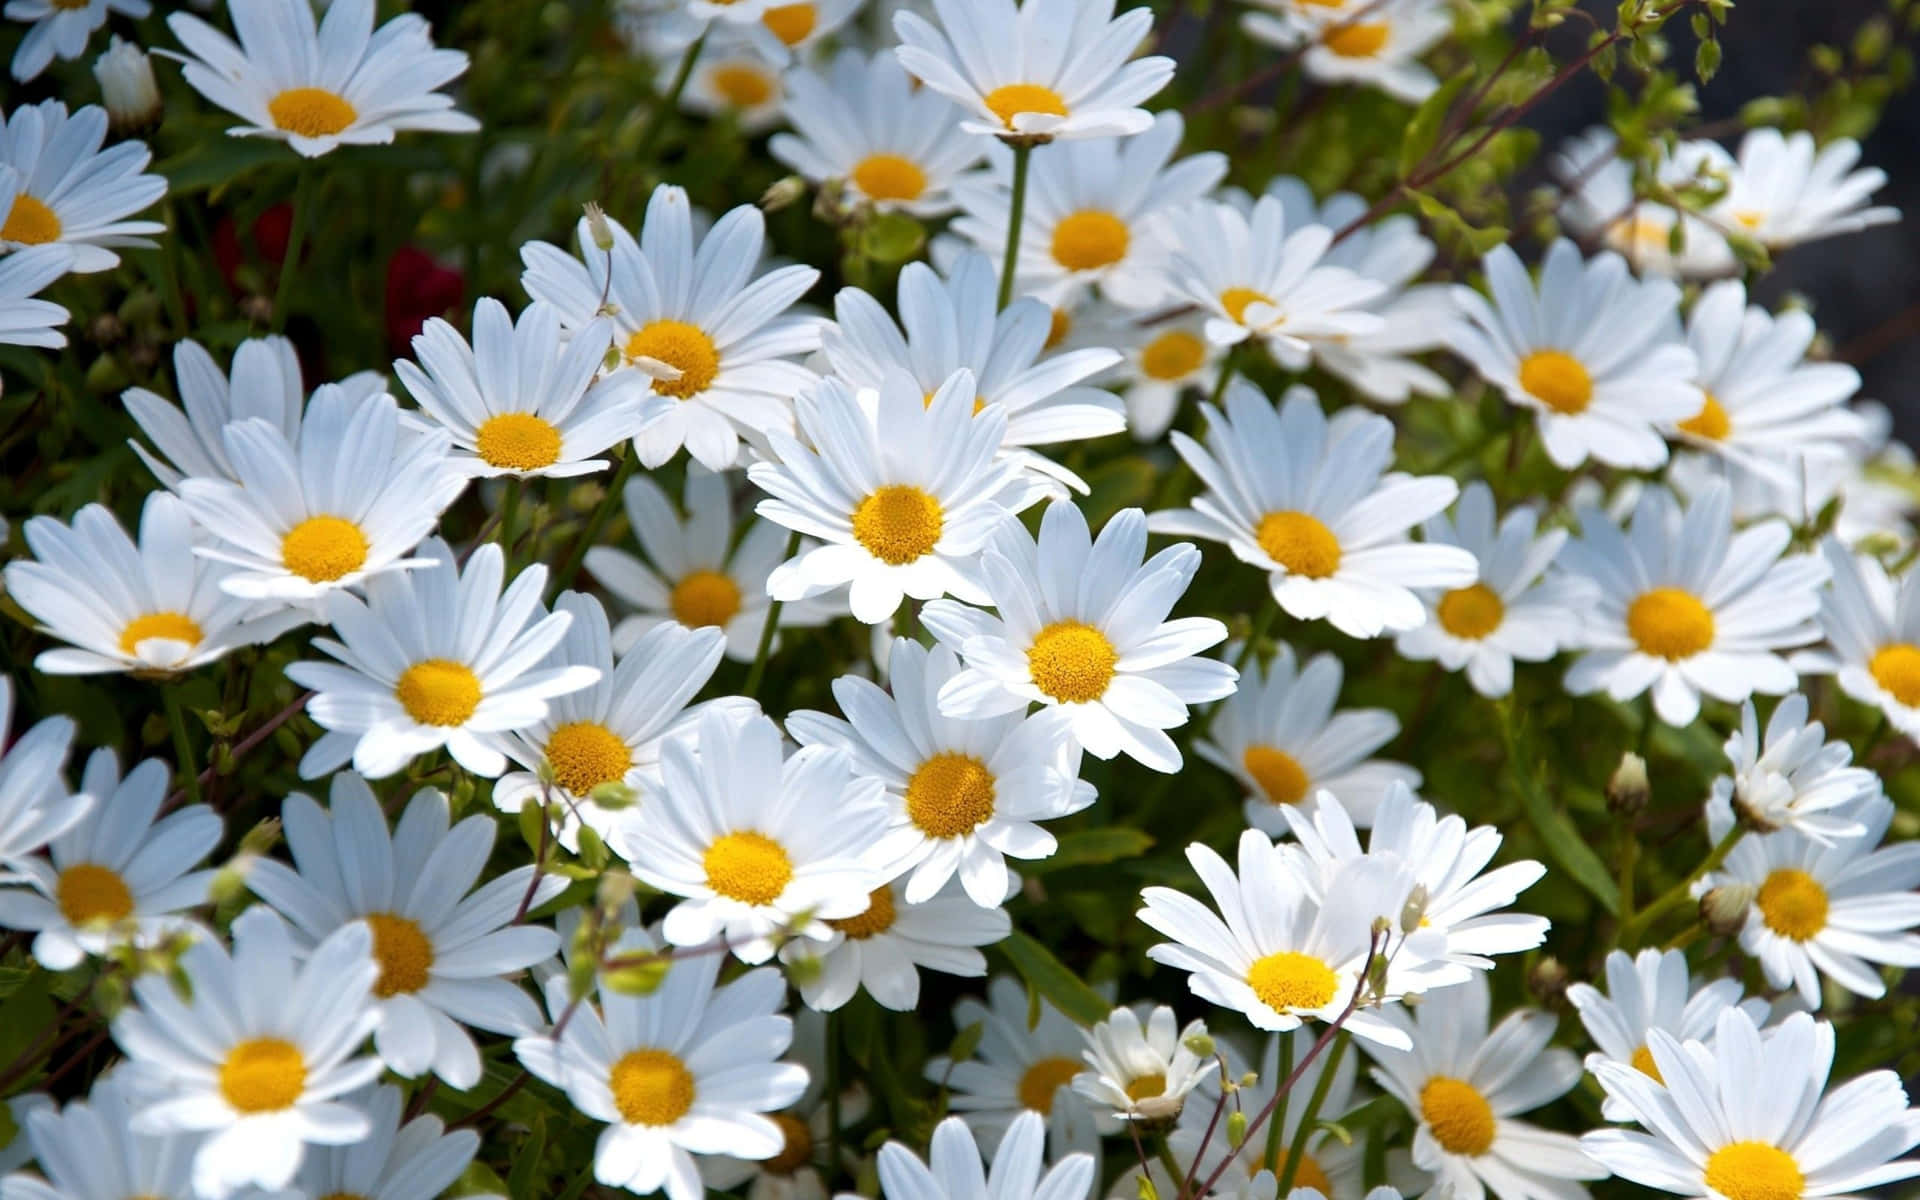 The beauty of nature shown through the simple elegance of a Daisy flower. Wallpaper